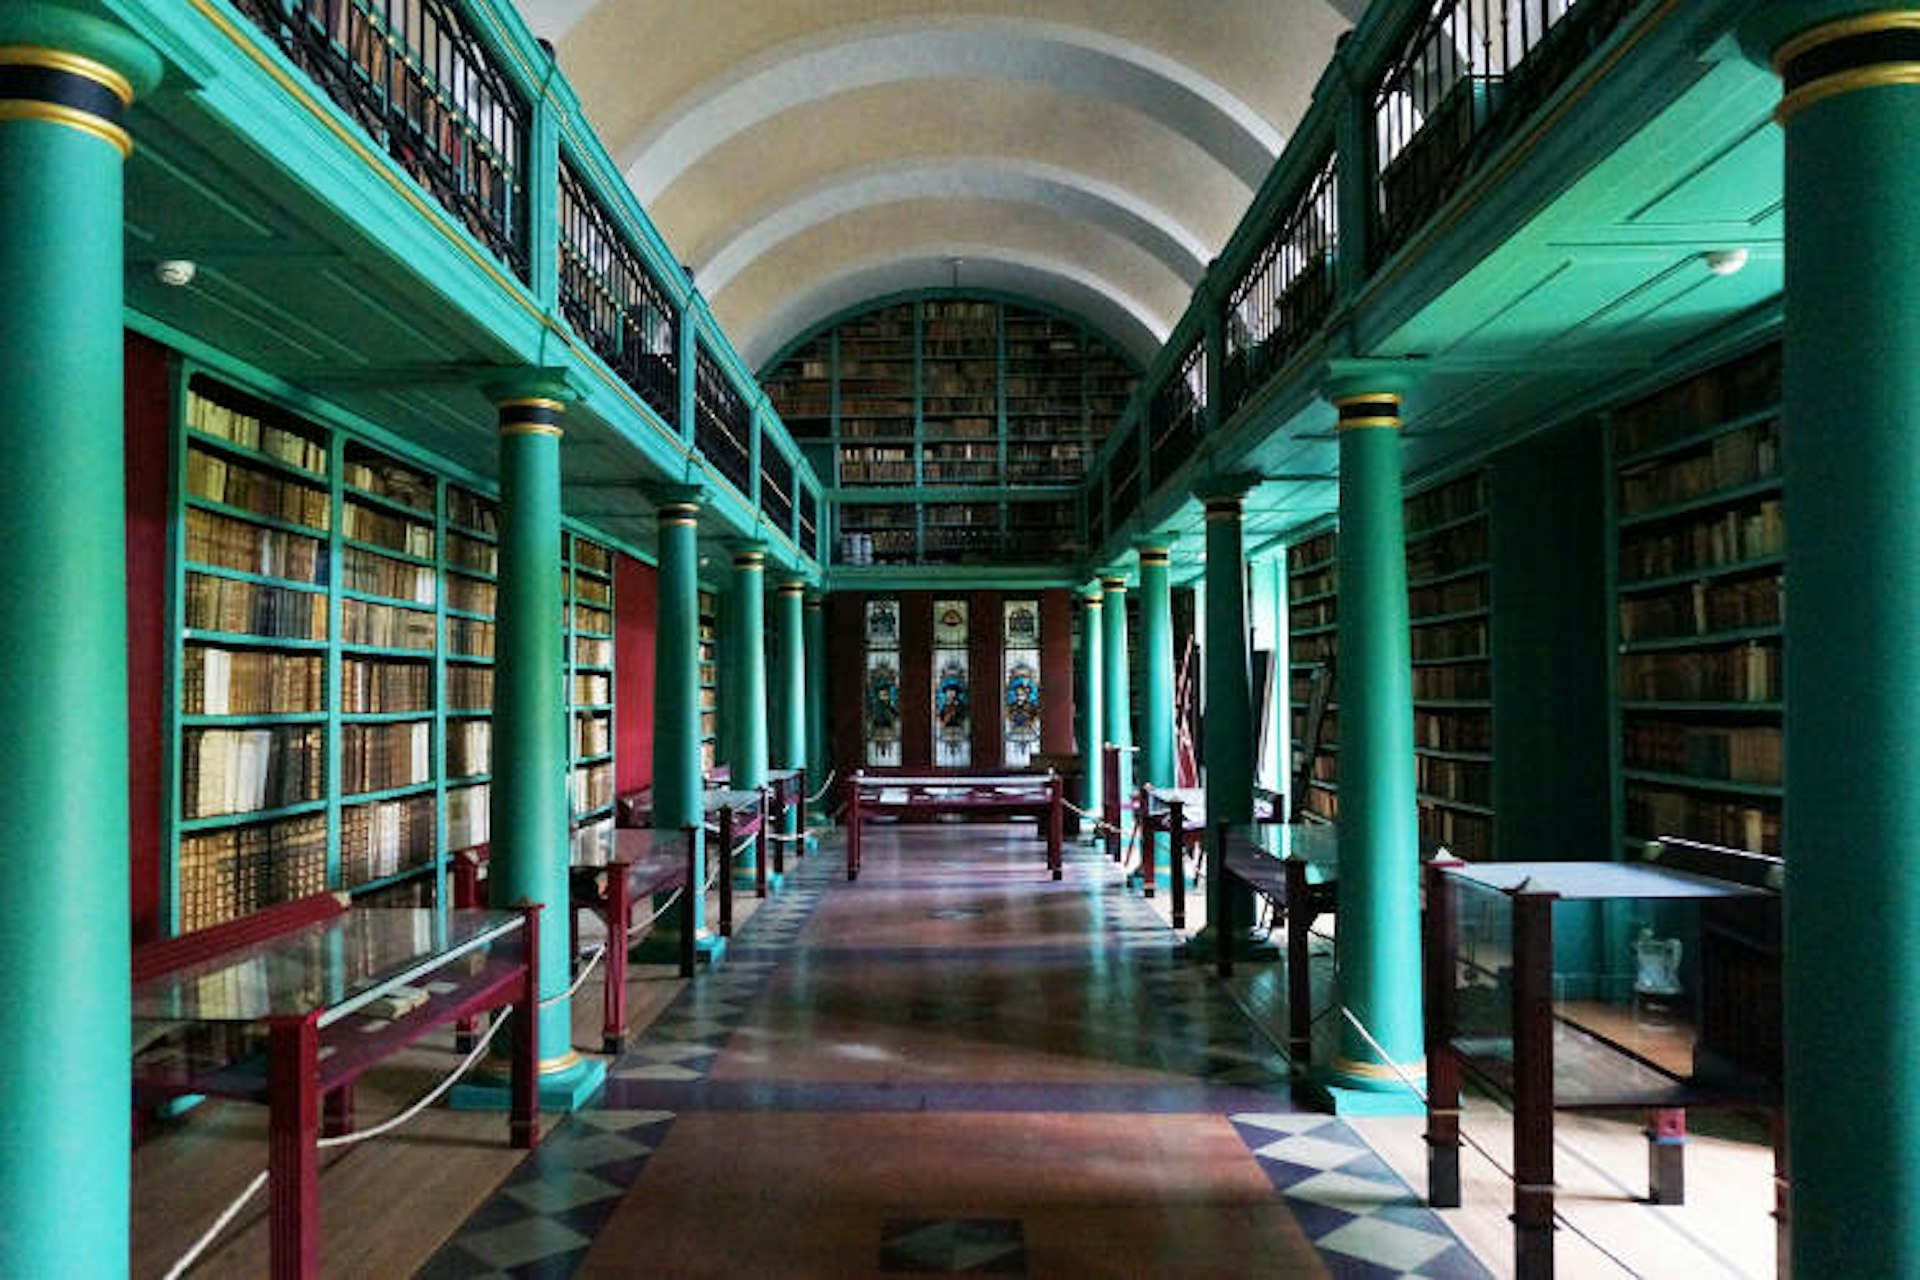 Aquamarine stylings in the library of Debrecen's Calvinist College. Image by Anita Isalska / Lonely Planet